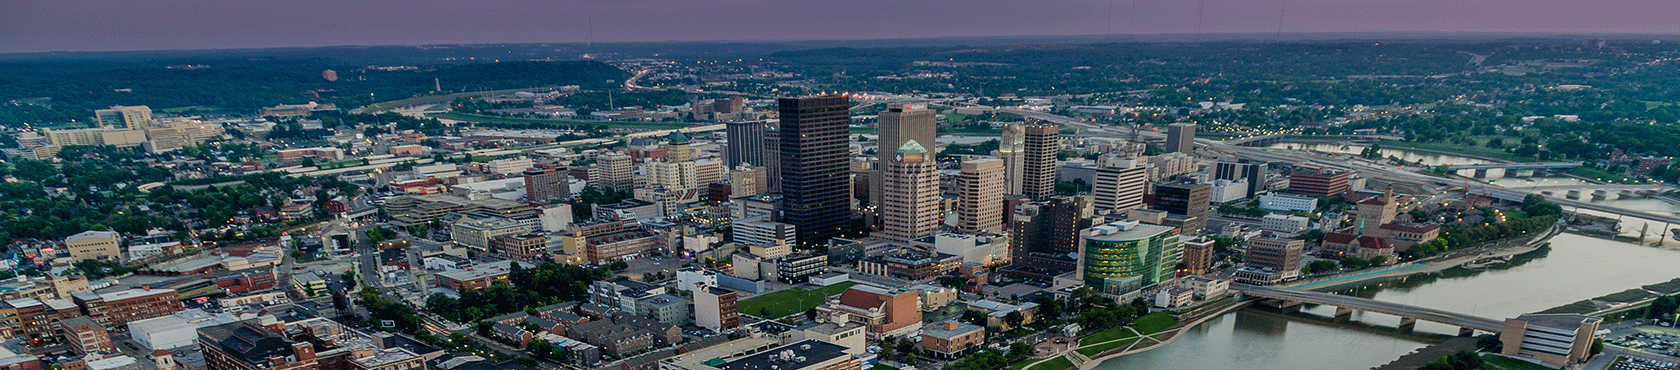 Aerial view of downtown Dayton